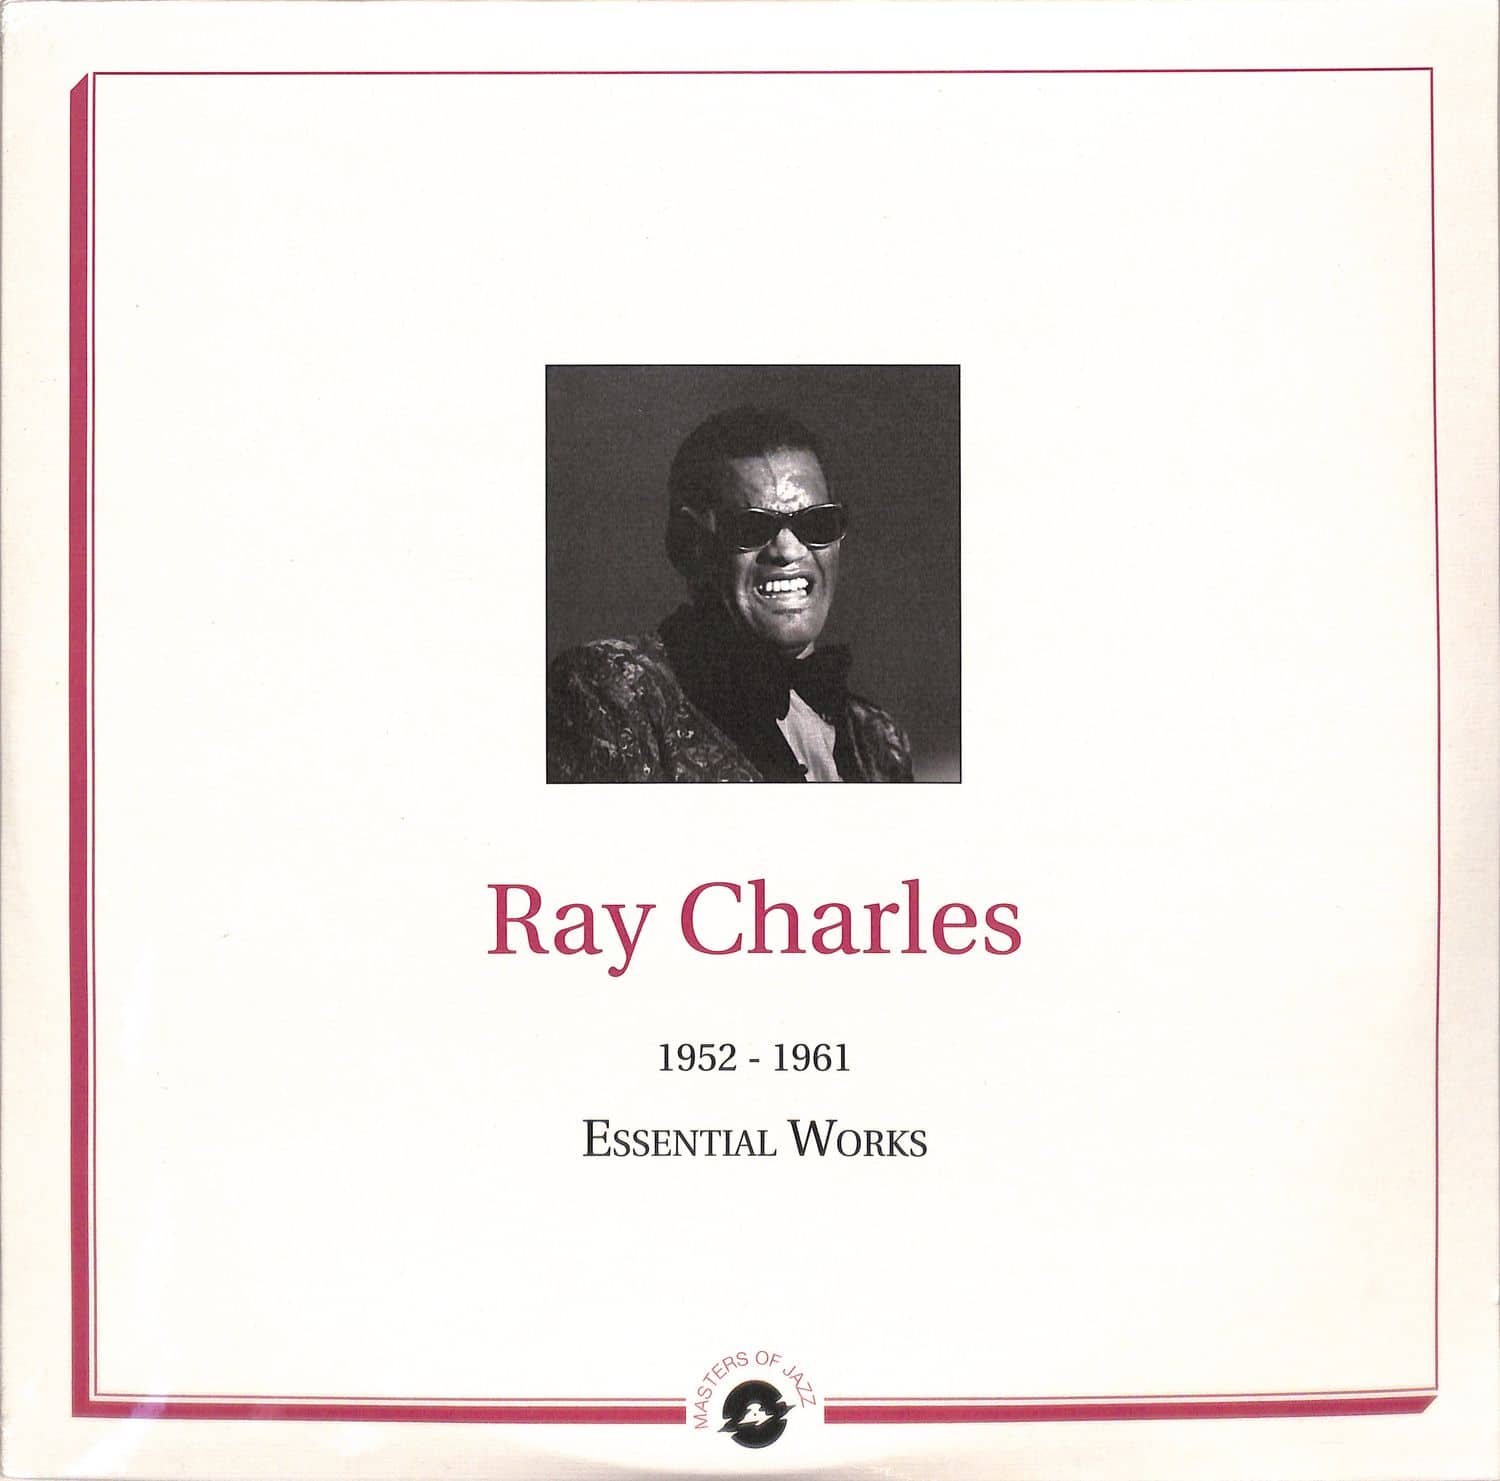 Ray Charles - ESSENTIAL WORKS: 1952-1961 